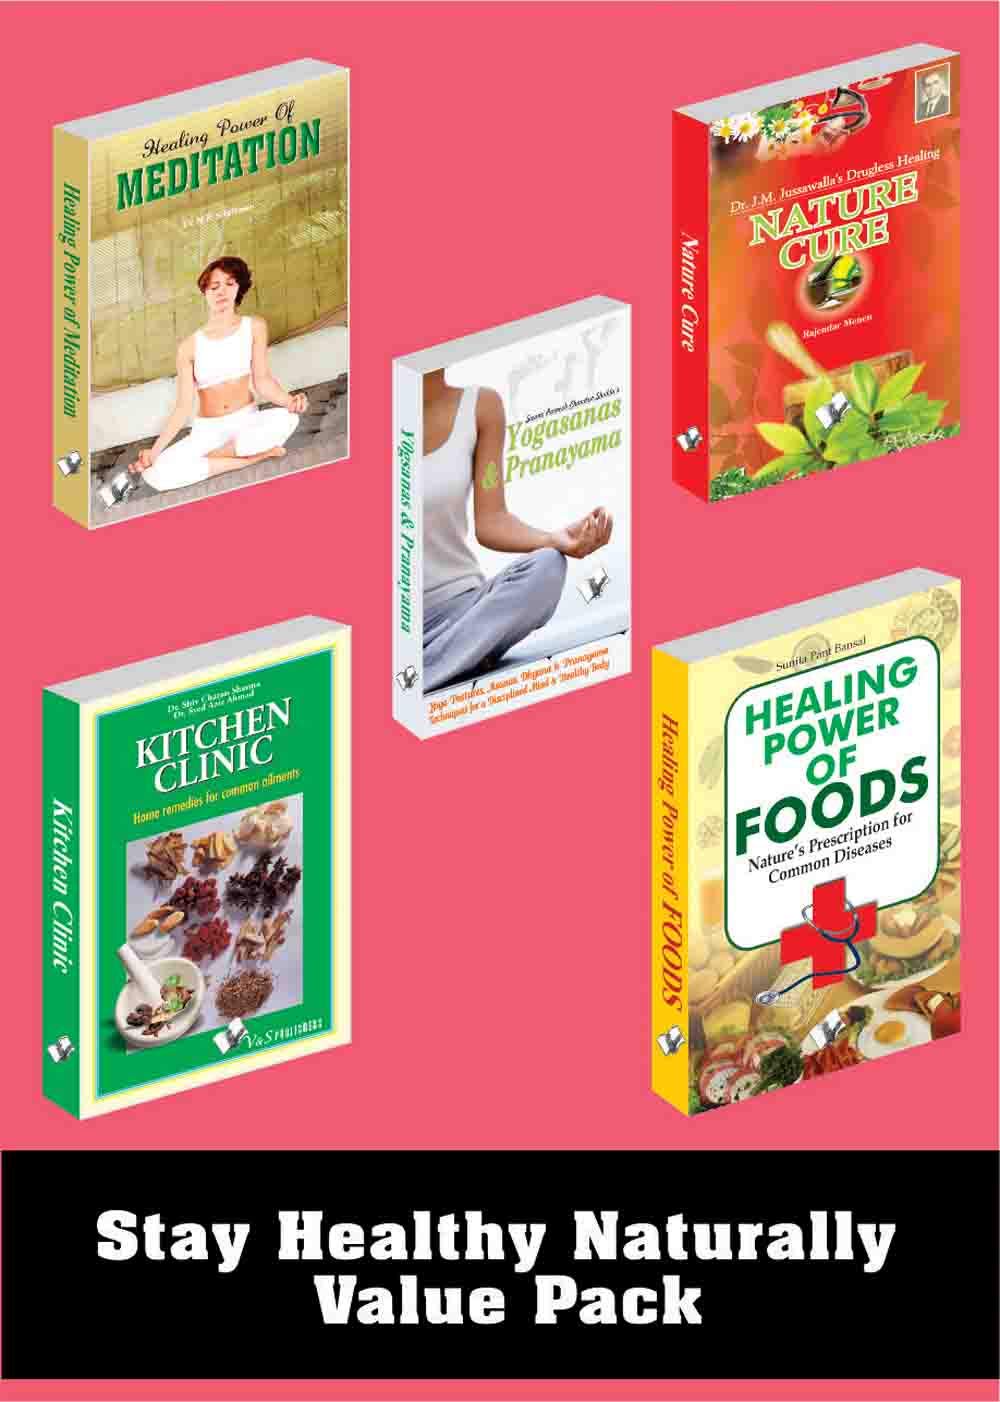 Stay Healthy Naturally Value Pack: Set of Books for Maintenance of Body Fitness and Health Naturally